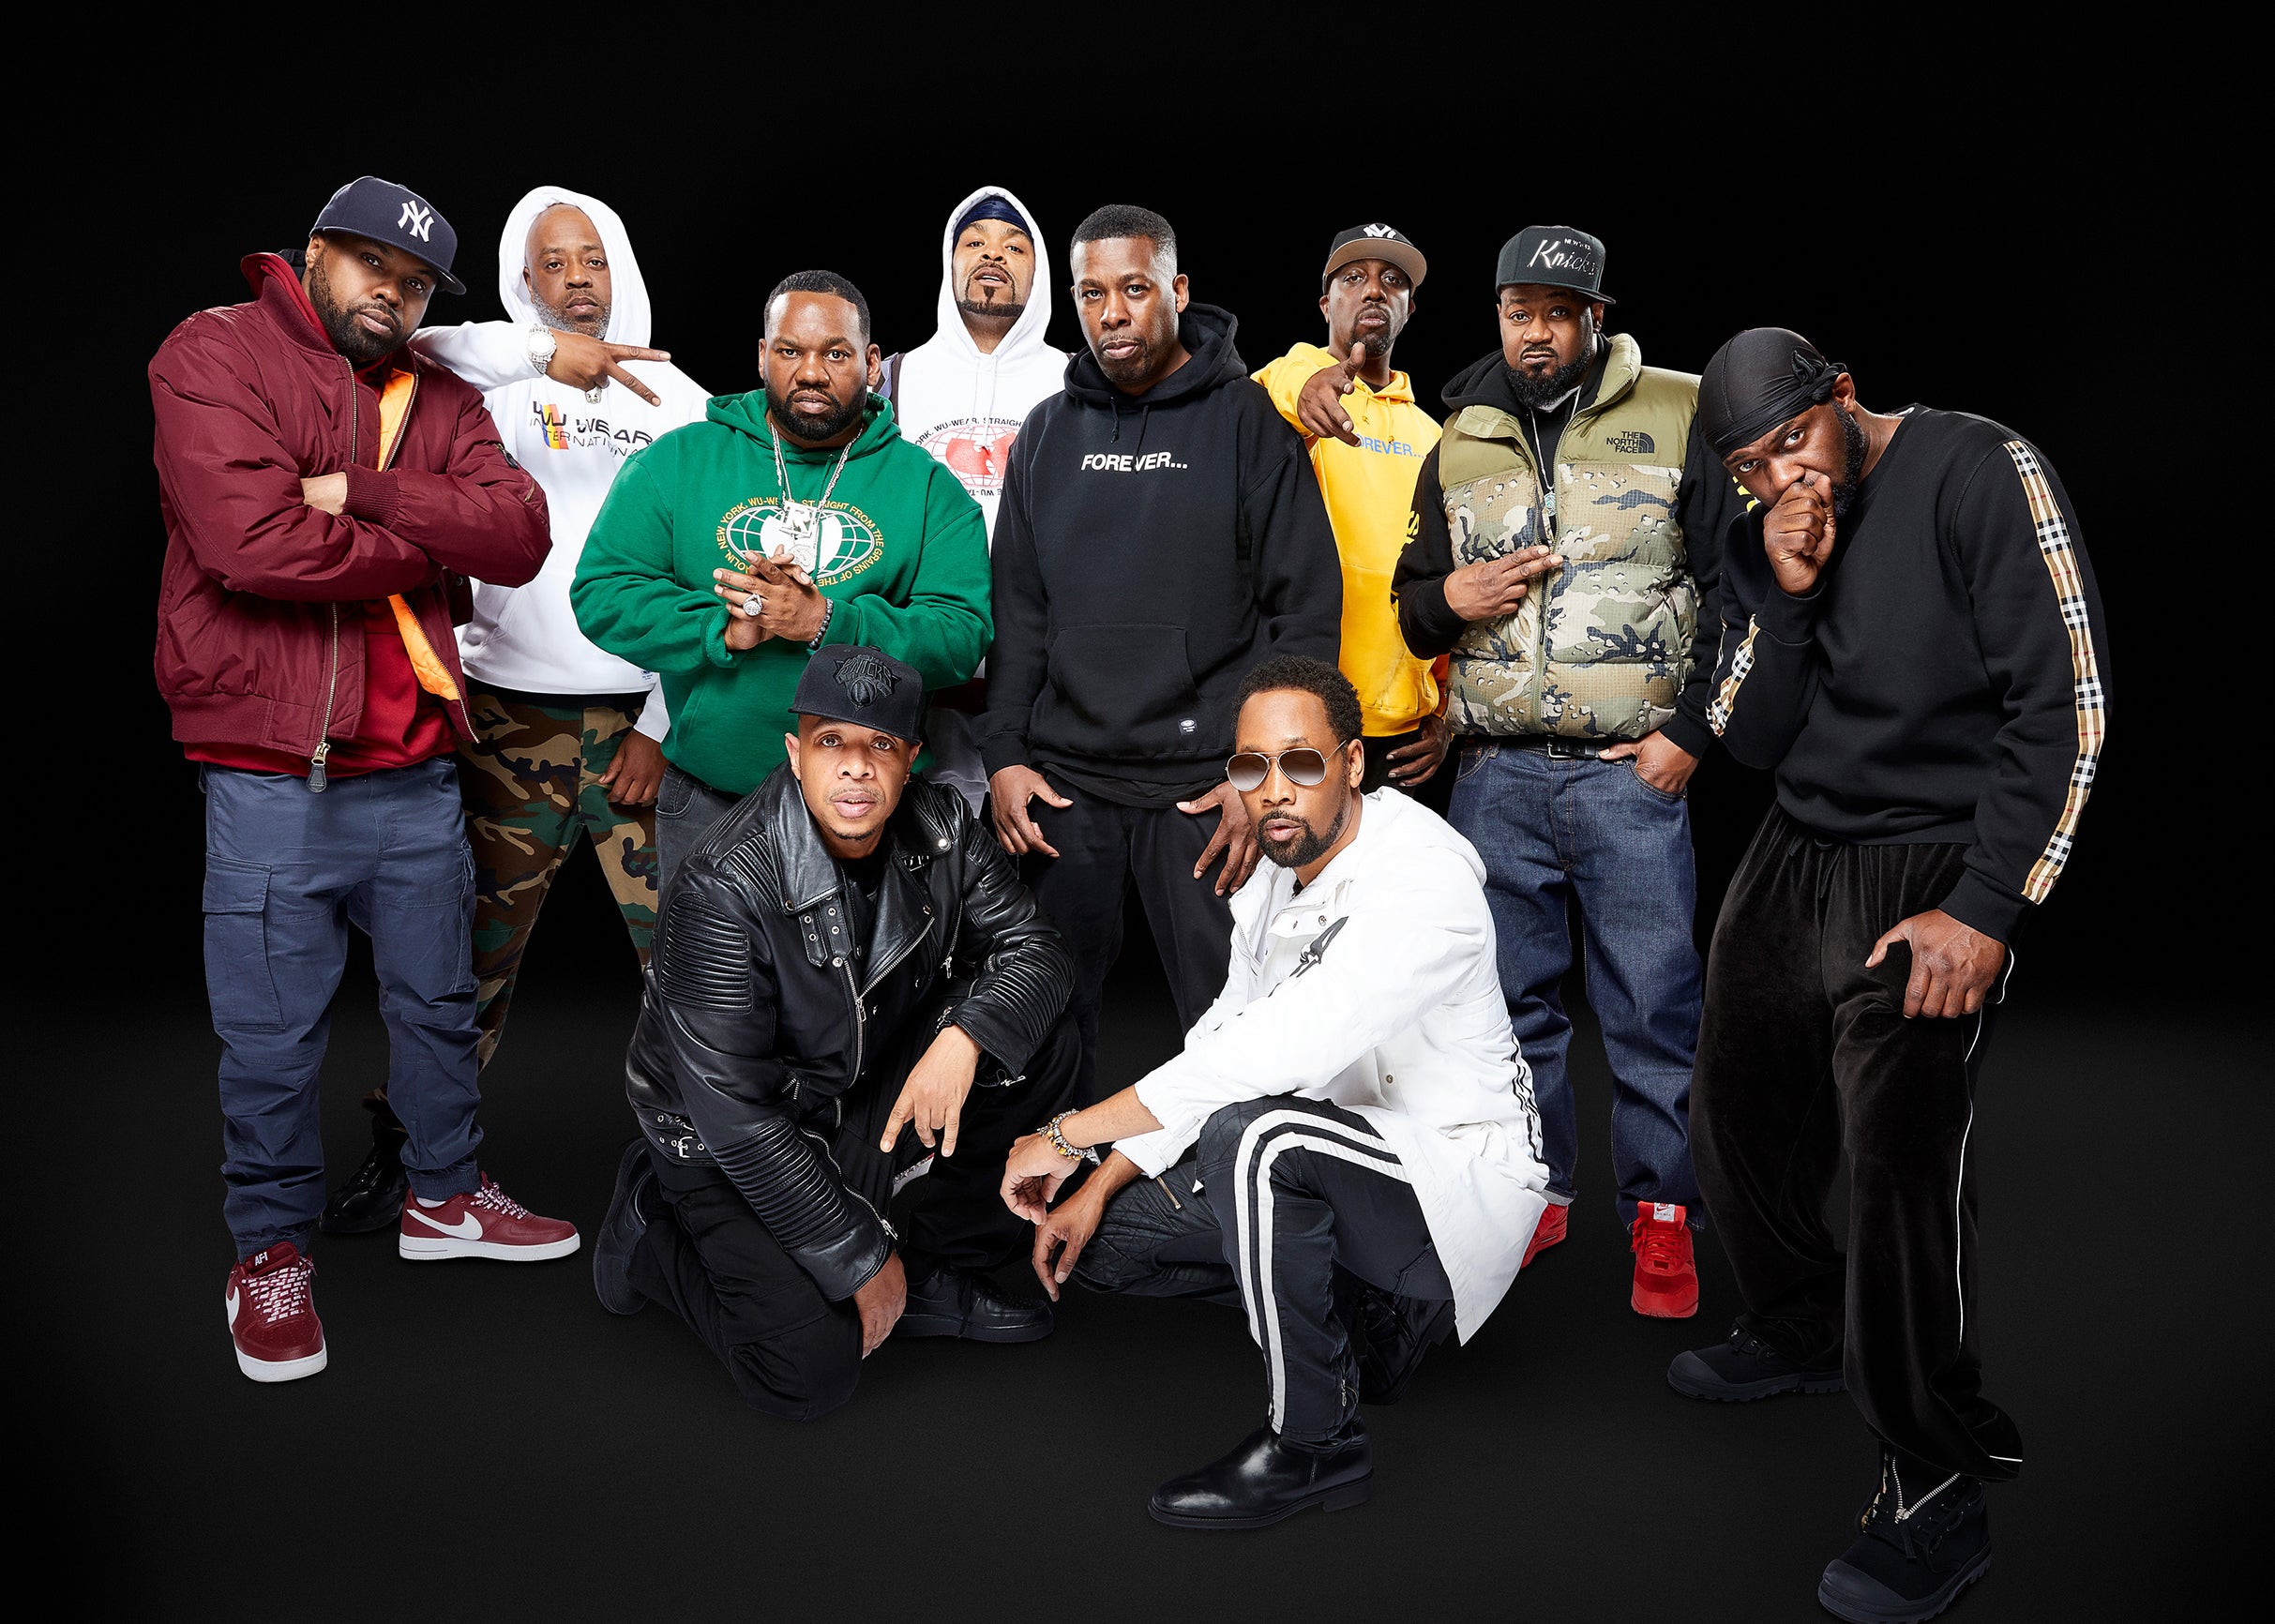 Wu-Tang Clan - HiNOTE Personalized Video Message (TICKET NOT INCLUDED)